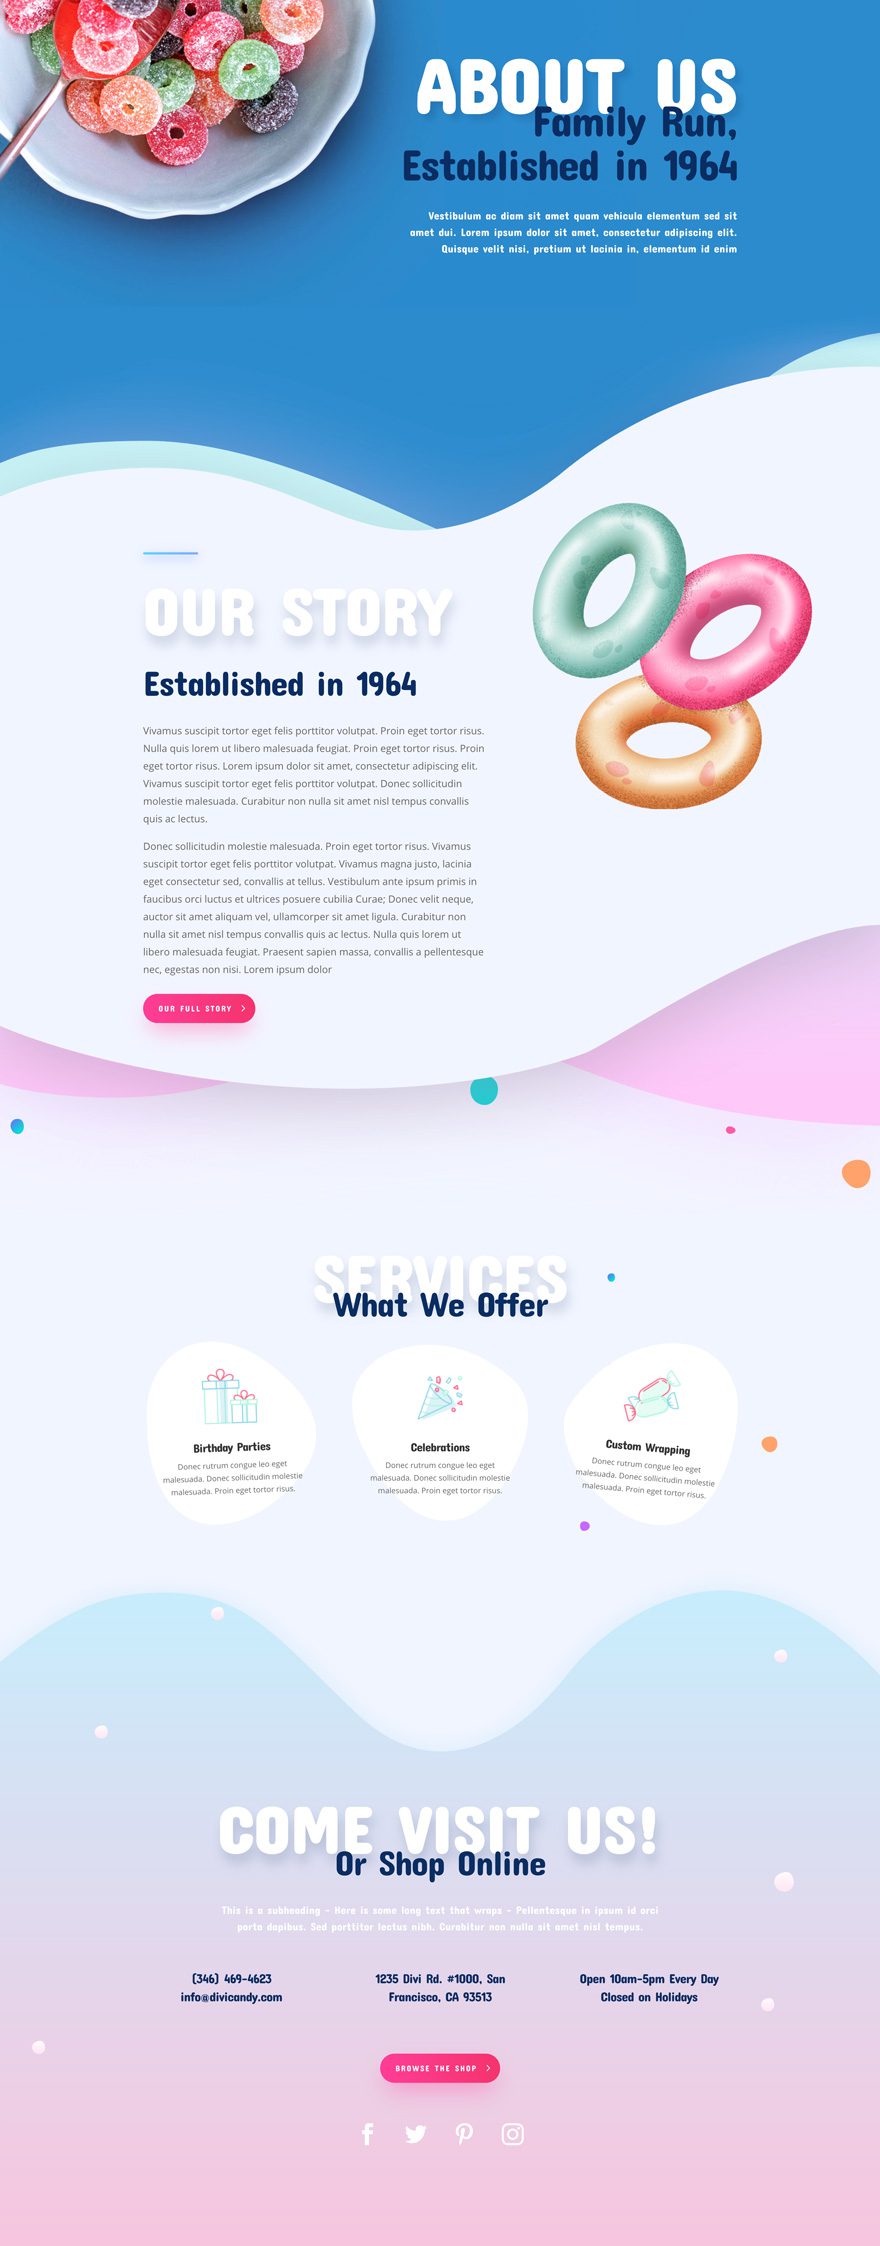 Divi Candy Store layout pack